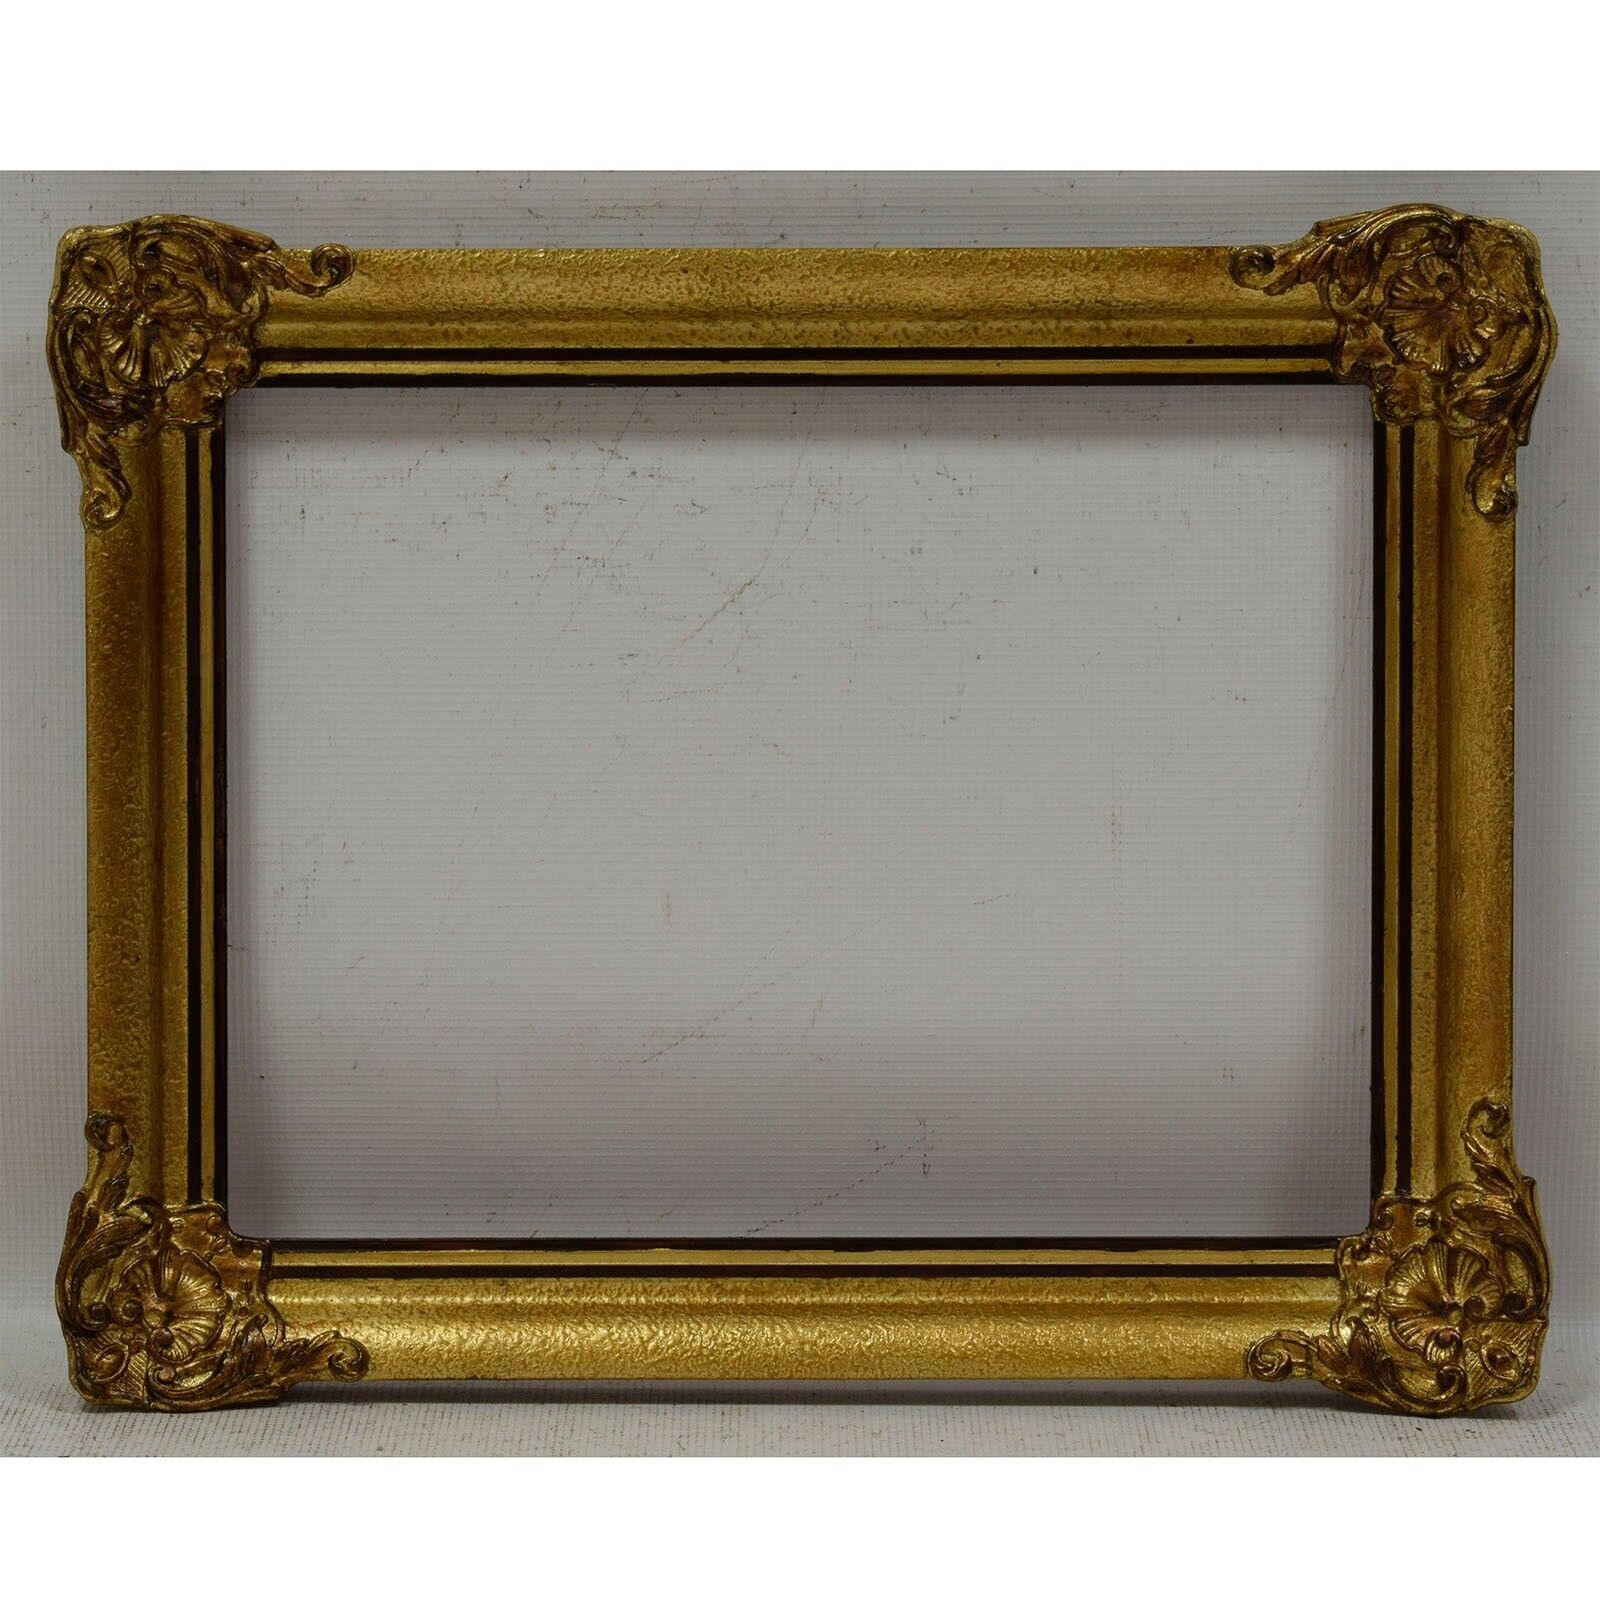 Ca. 1930-1940 Old wooden frame decorative with metal leaf Internal: 16.1x12 in